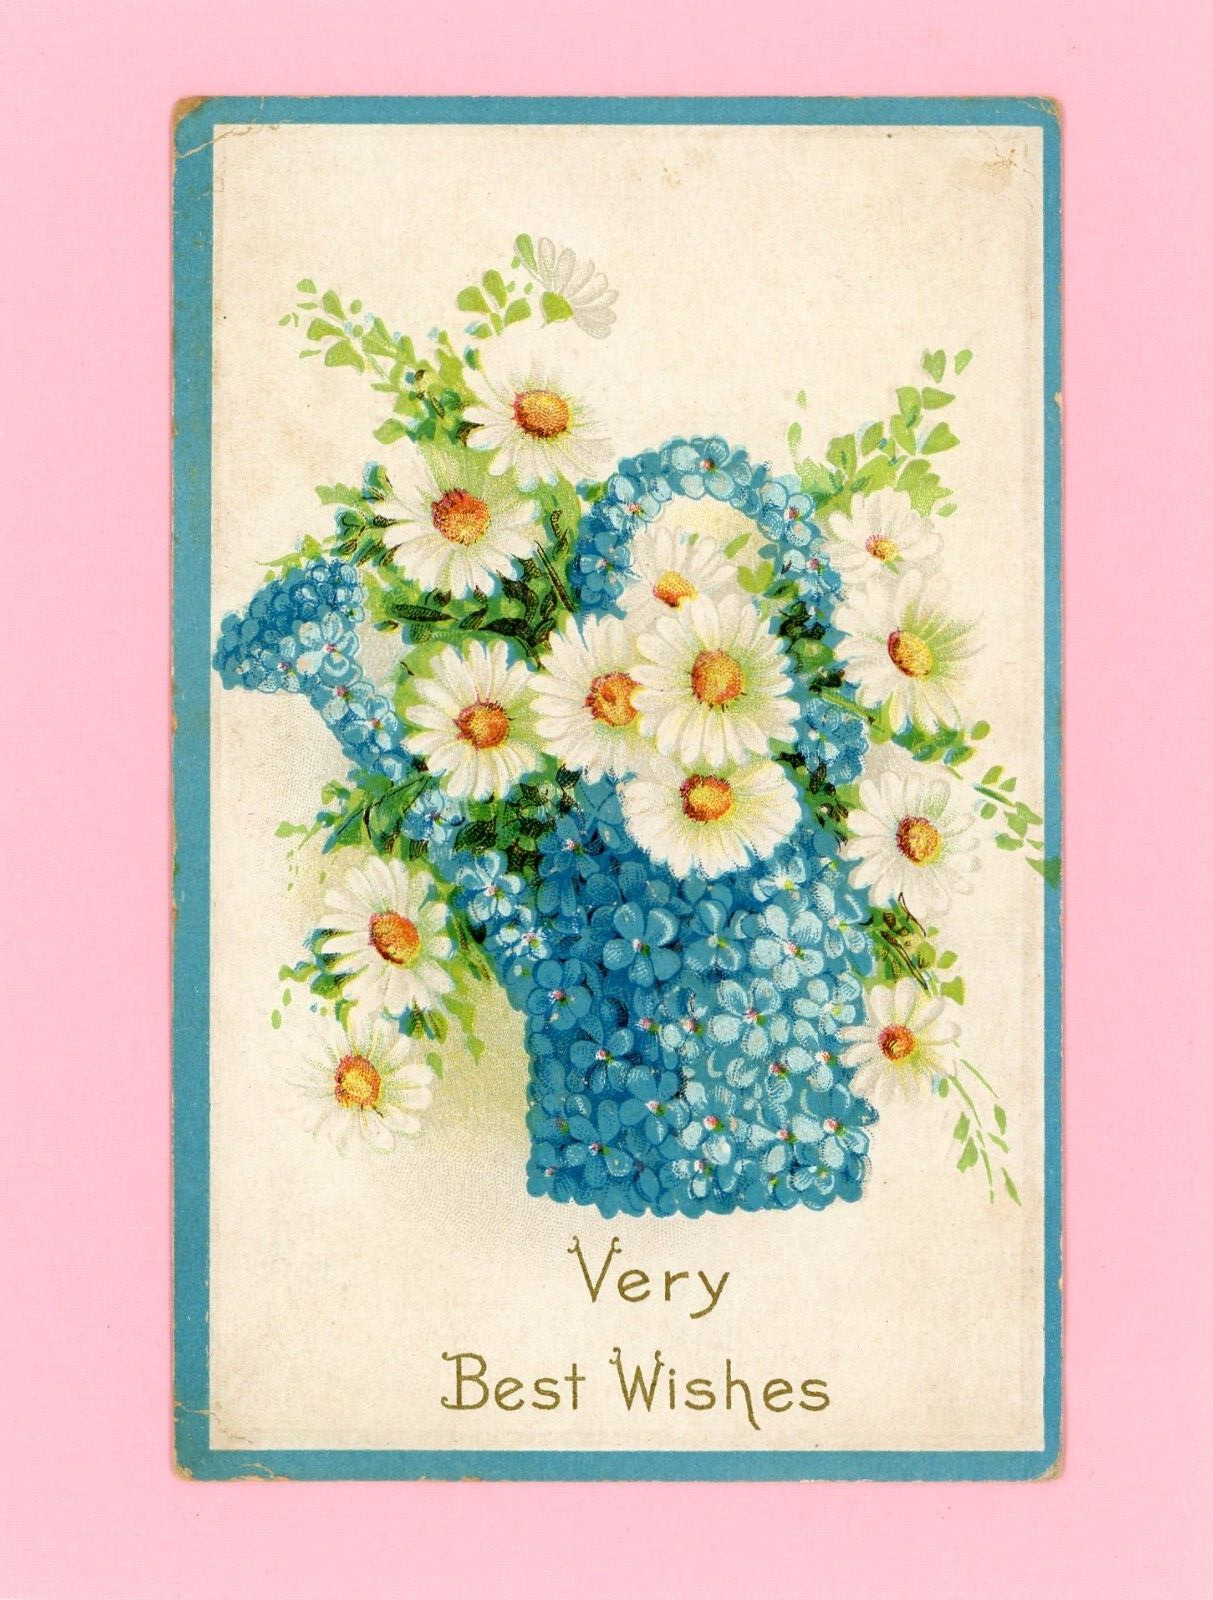 Antique Best Wishes Greetings Postcard - Sandford